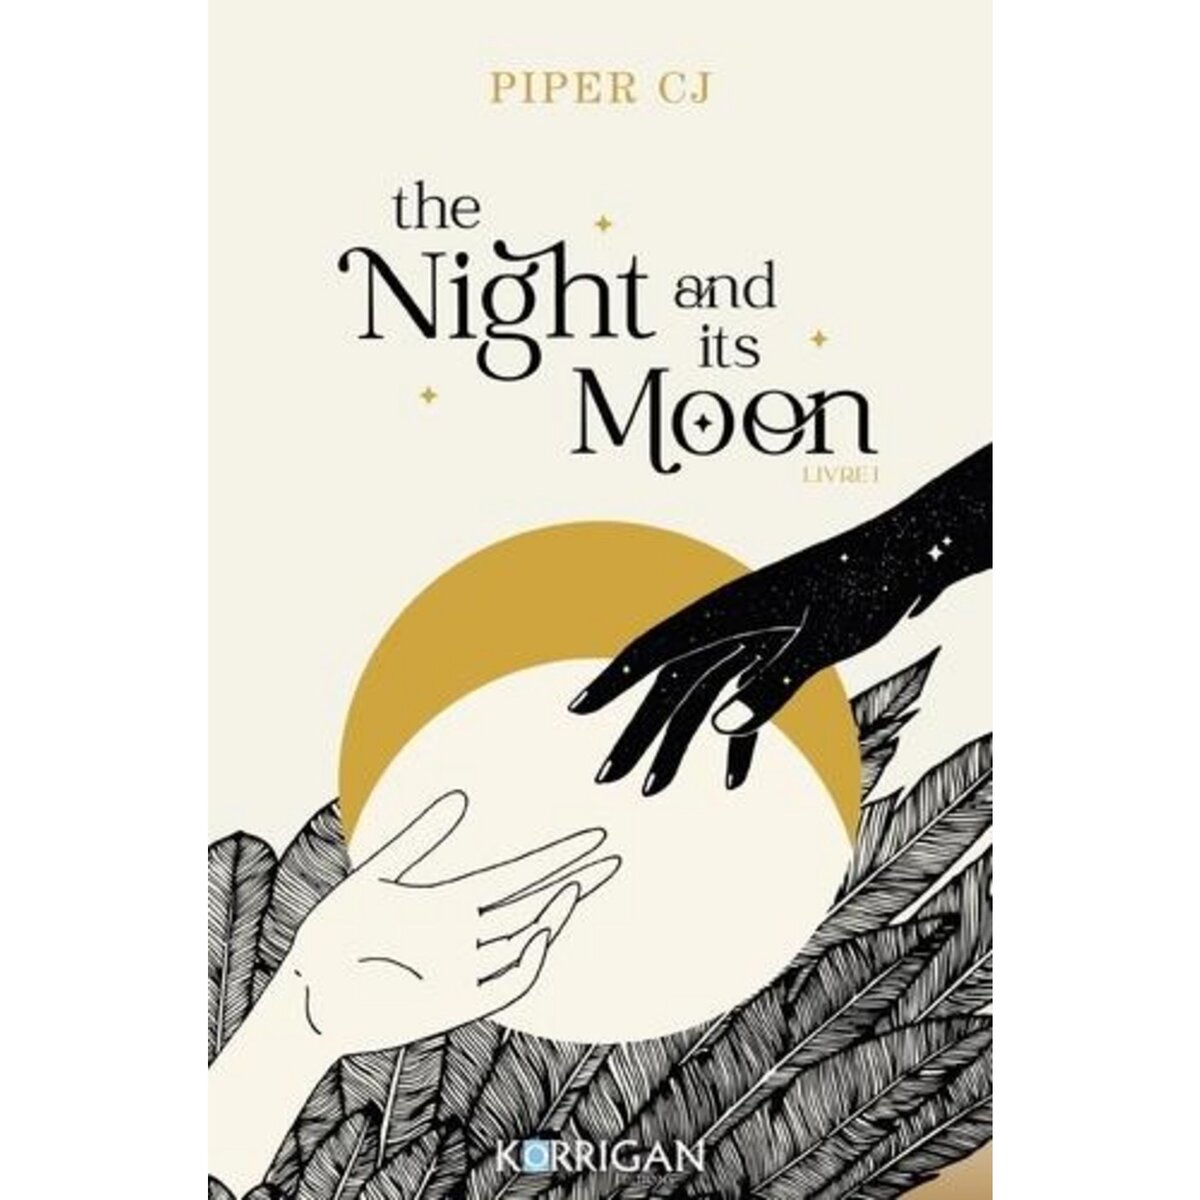  THE NIGHT AND ITS MOON TOME 1 , Piper CJ